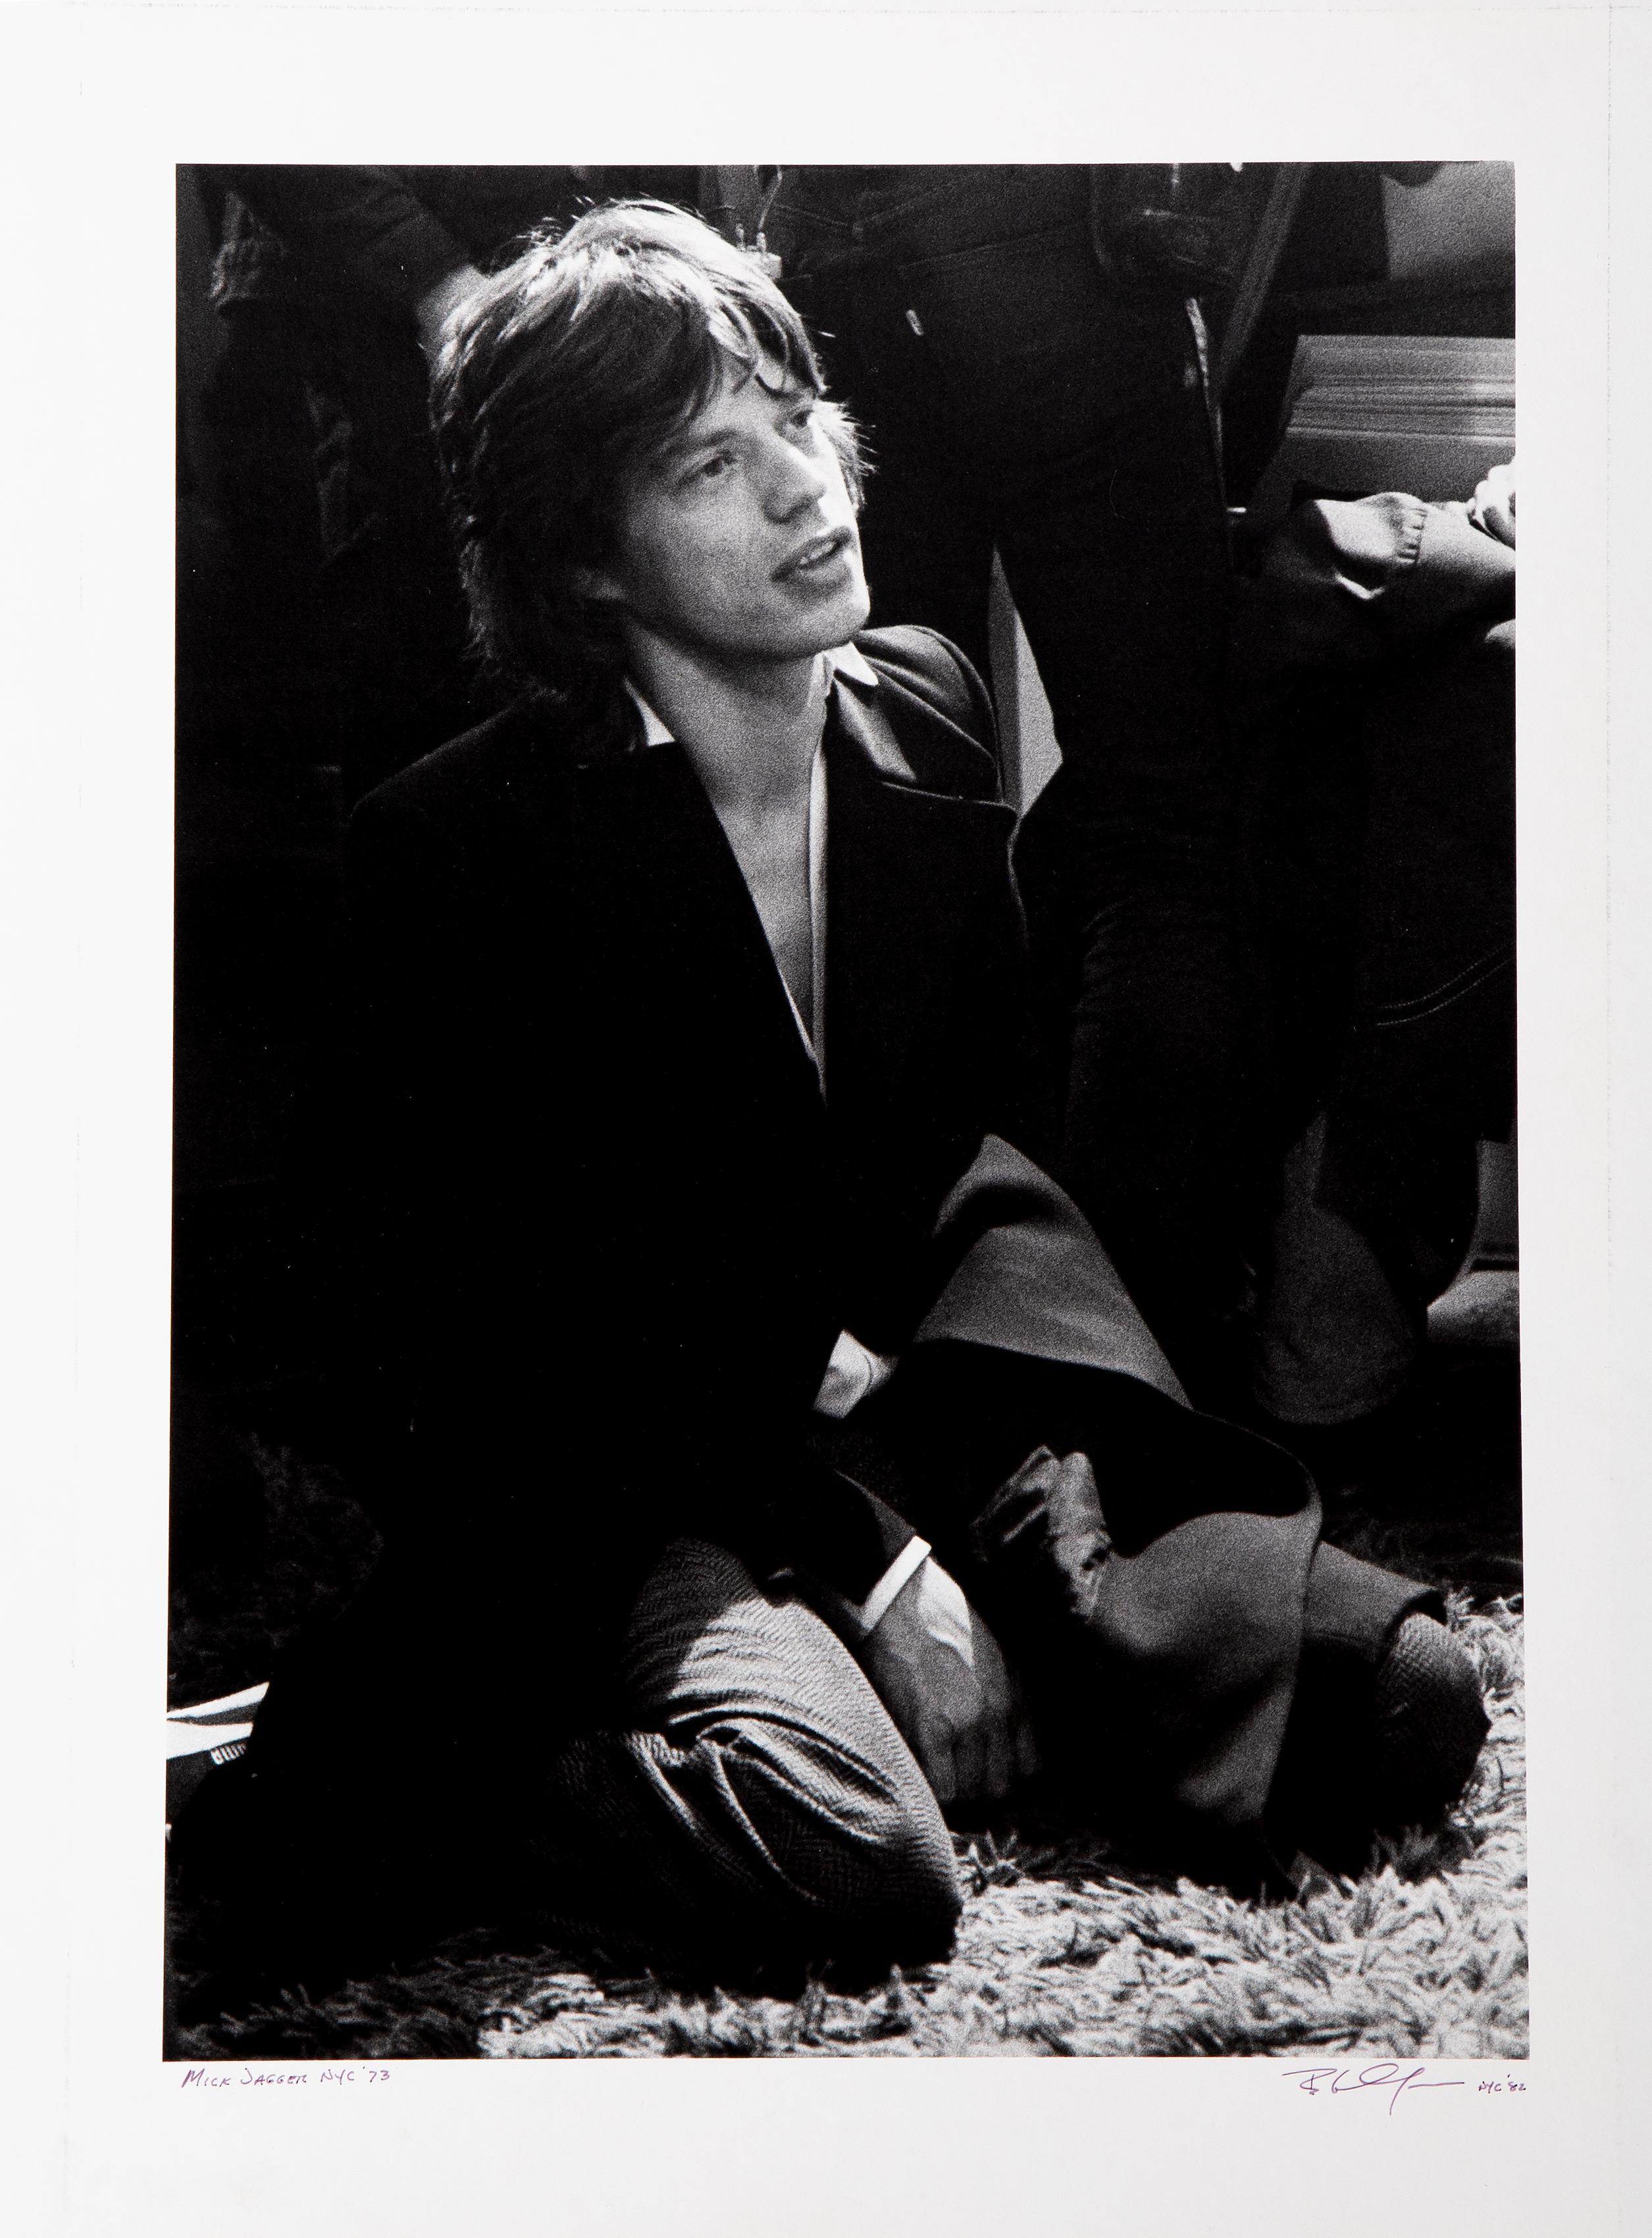 Mick Jagger
Bob Gruen, American (1945)
Date: 1973
Gelatin Silver Print, mounted to board, signed, titled and dated in pen
Image Size: 16 x 11.5 inches
Size: 20 x 16 in. (50.8 x 40.64 cm)